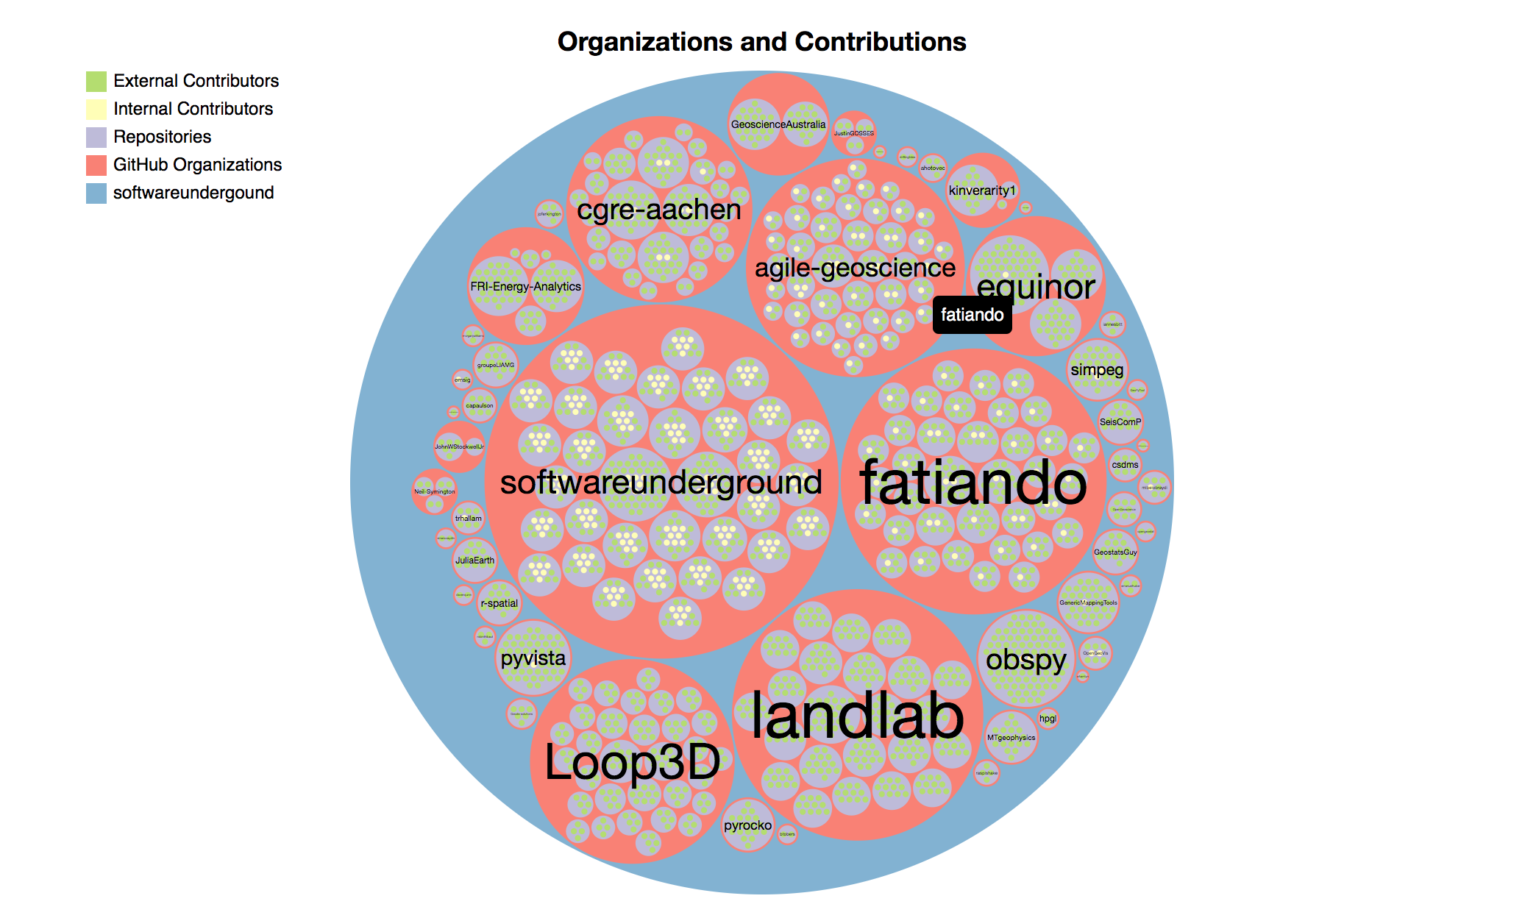 "A circle packing chart that shows which contributers are in which organizations and how much they contribute to geoscience repositories."